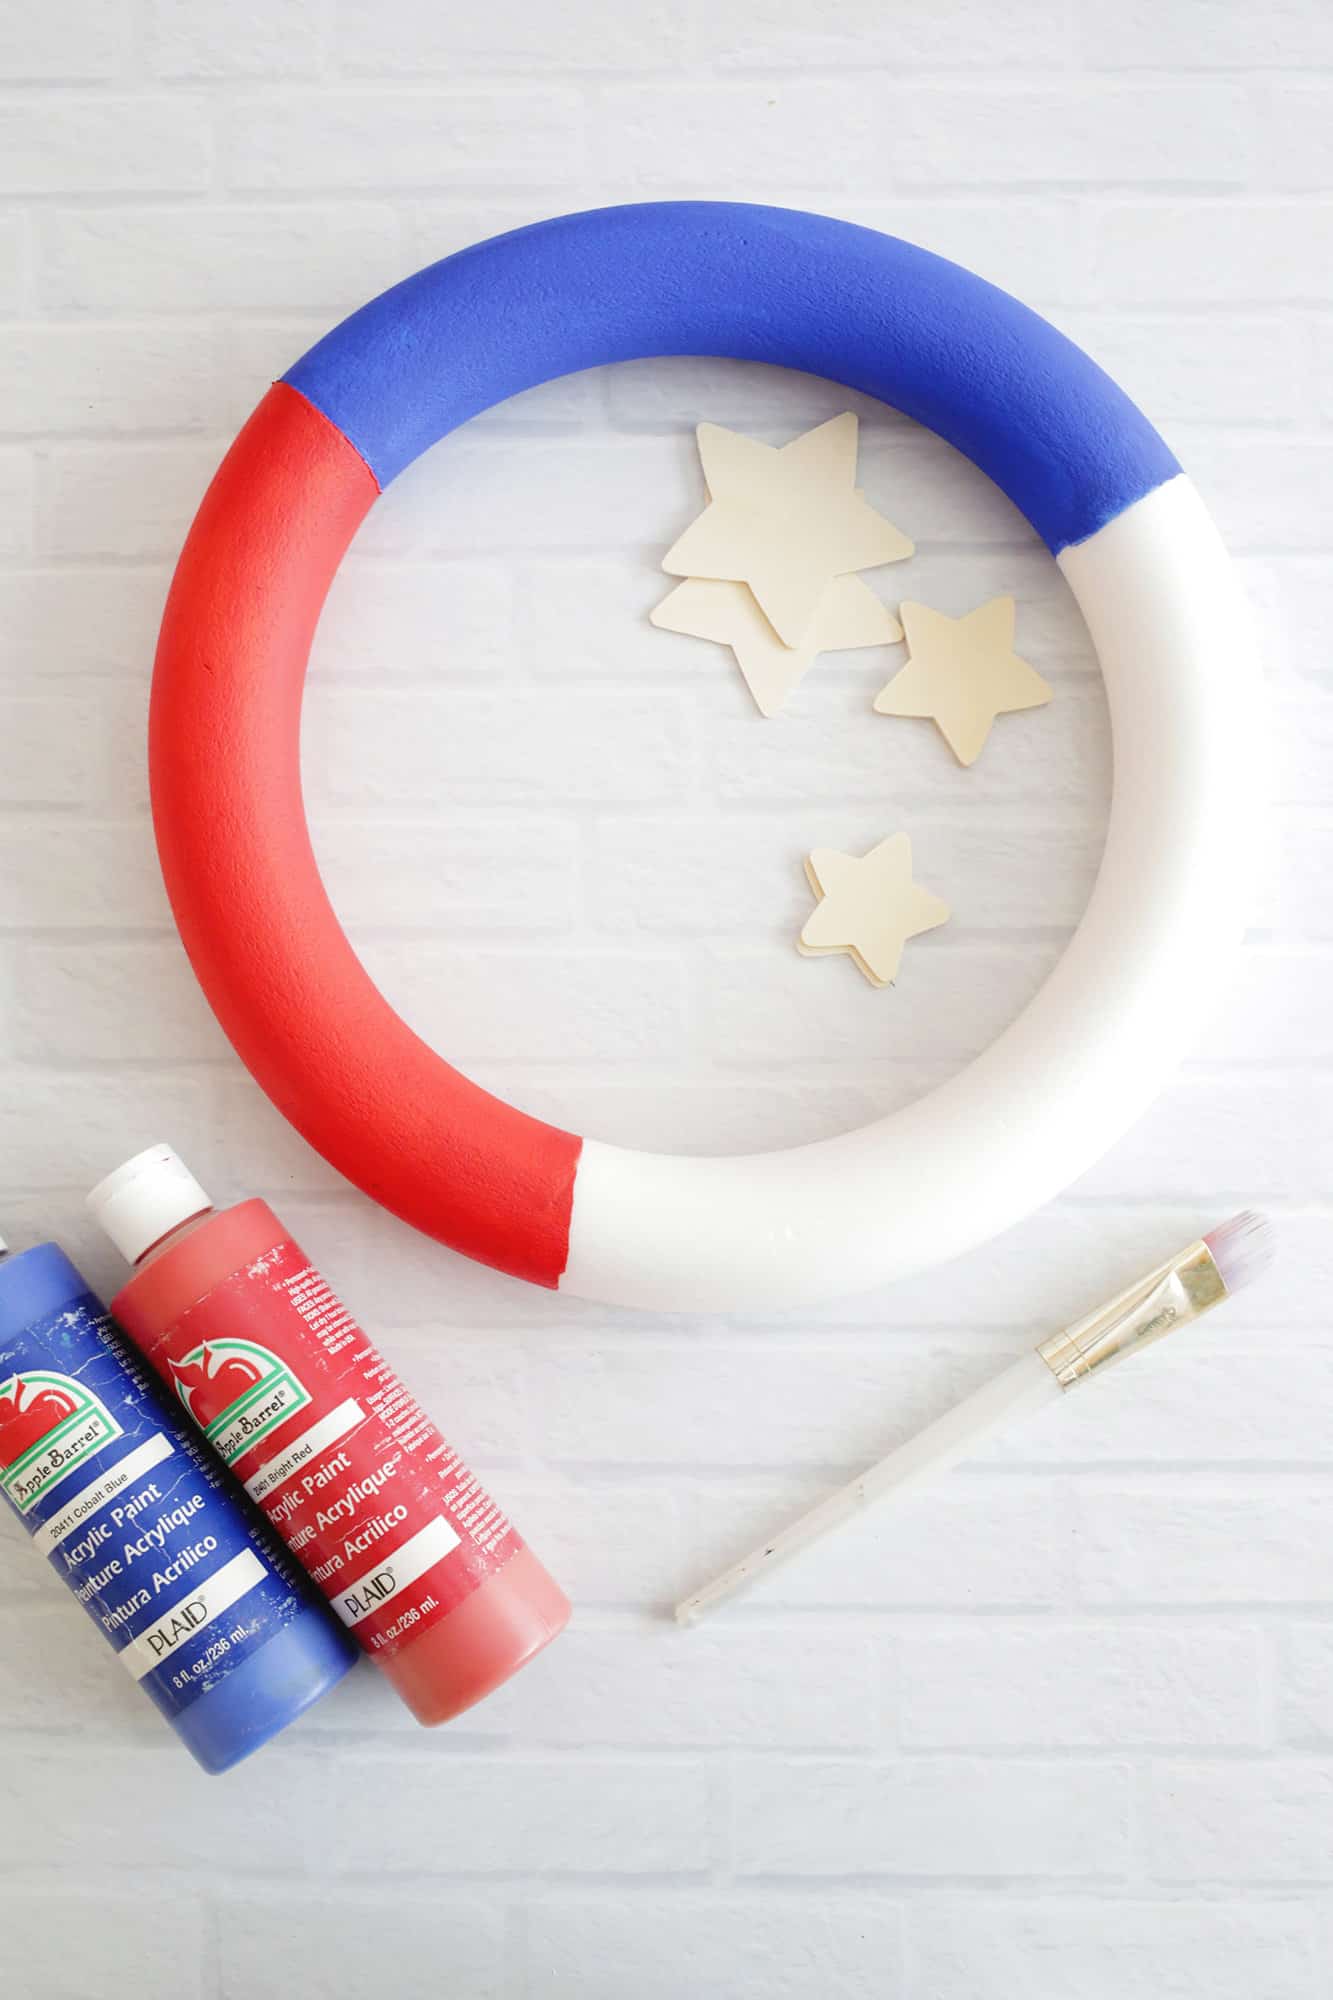 Wreath frame divided into red, white and blue sections